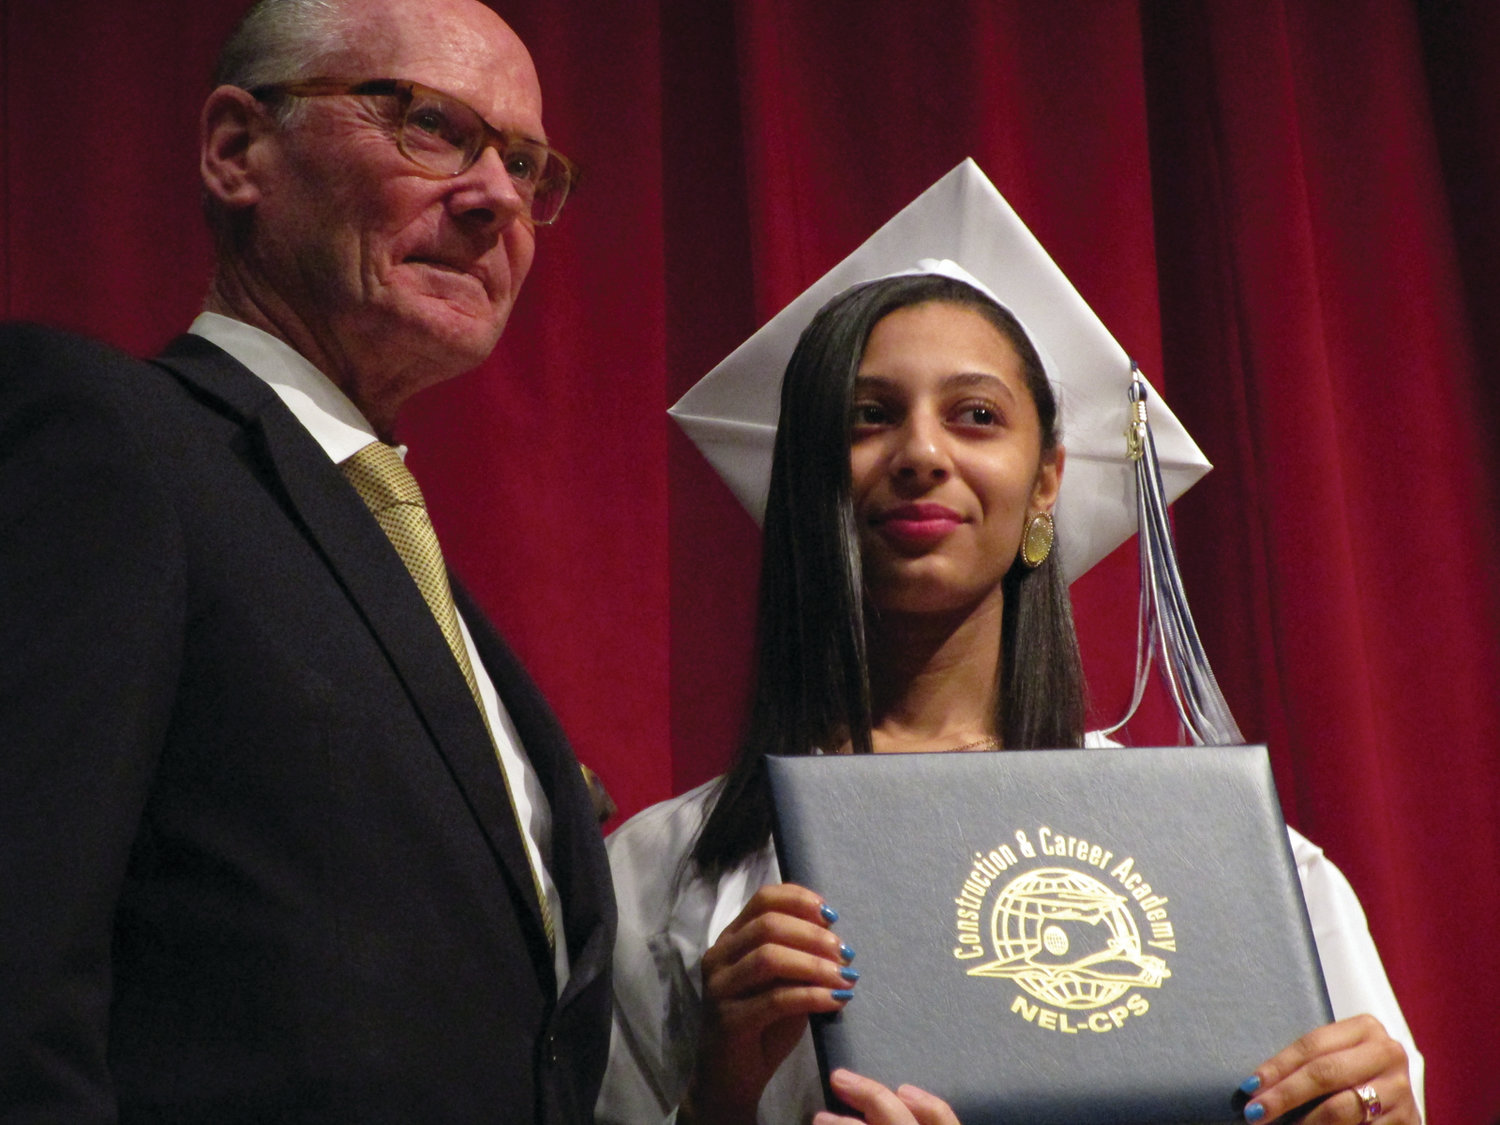 MOMENT OF ACHIEVEMENT: Dennis Curran, executive director of the NEL/CPS Construction & Career Academy, presents a diploma to Kristal Brown, the "top scholar" in the academy's class of 2019.